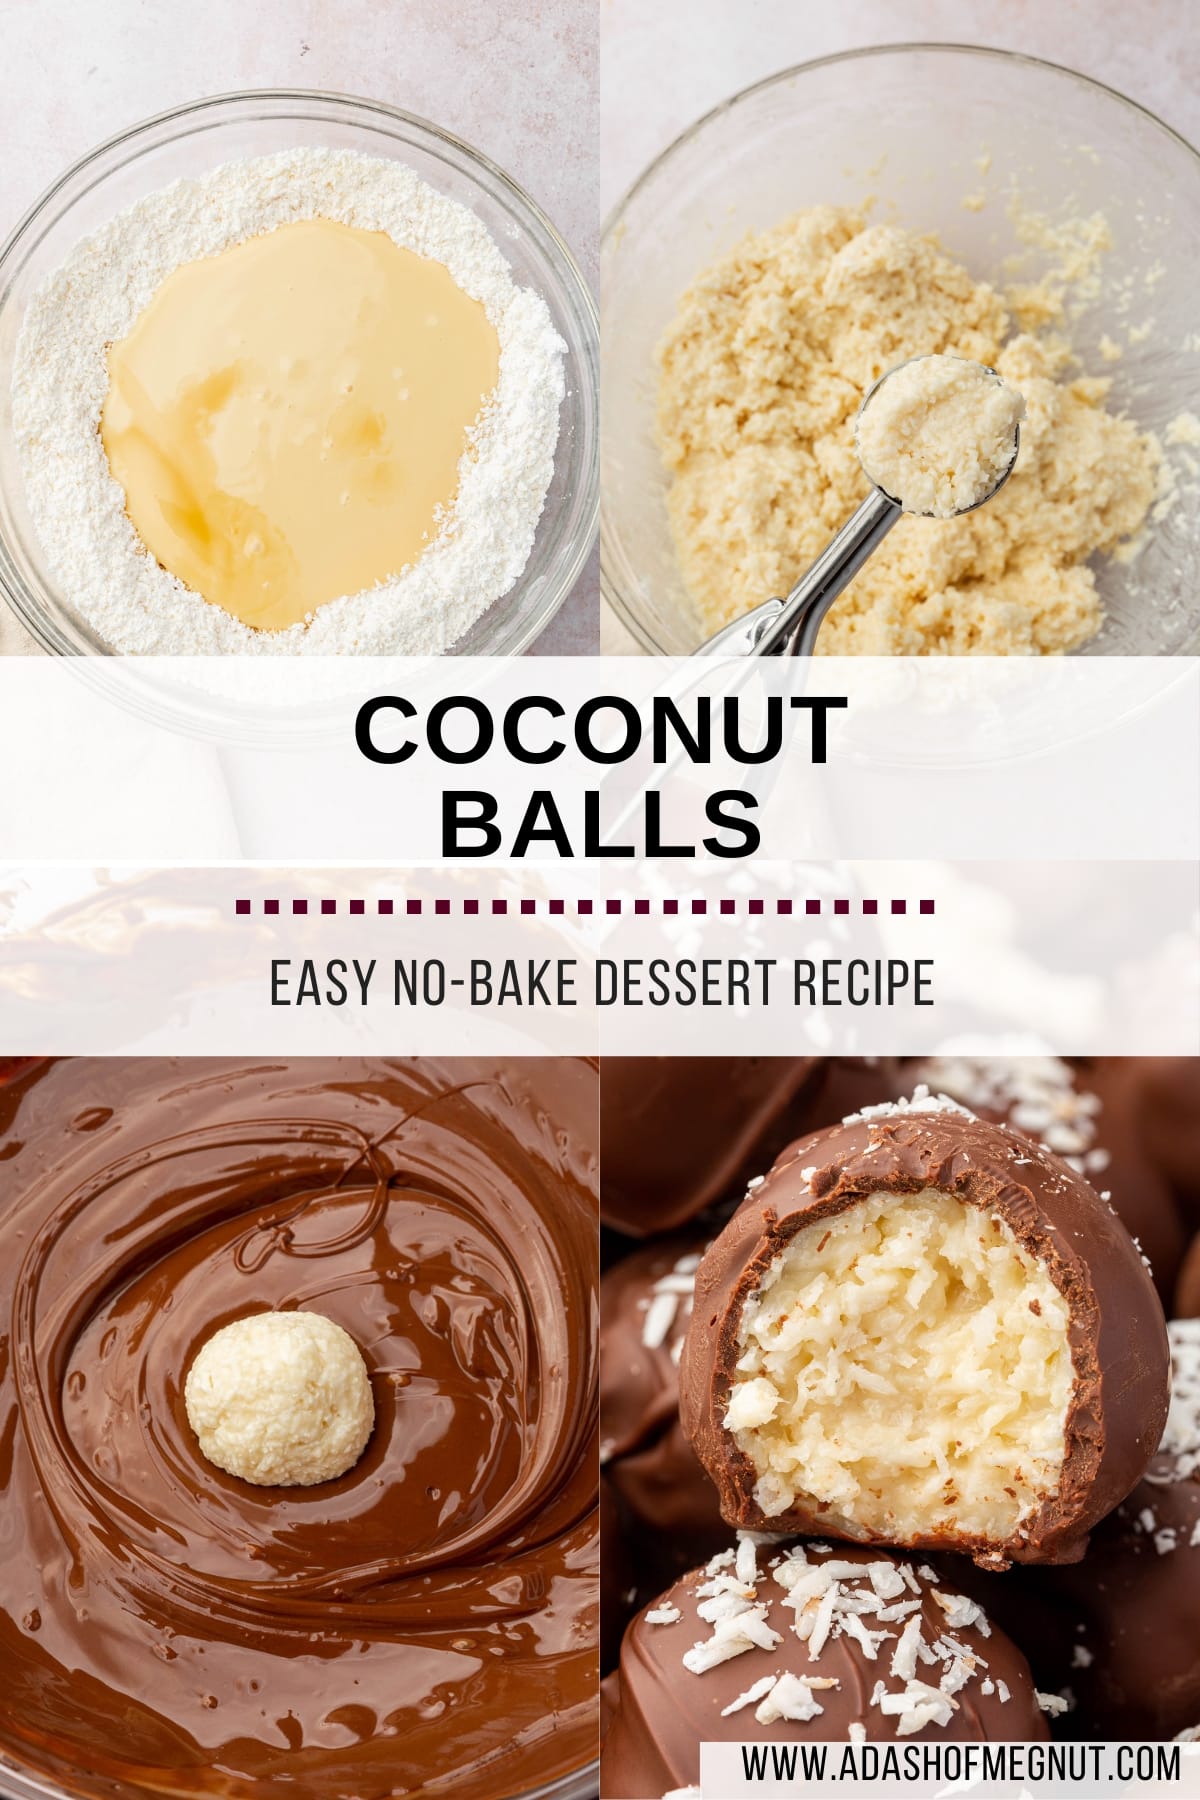 A four photo collage showing the process of making coconut balls. Photo 1: Shredded coconut and powdered sugar are topped with sweetened condensed milk and vanilla in a large bowl. Photo 2: A stainless scooper with coconut ball dough in it over a larger bowl of more truffle dough. Photo 3: A coconut ball in a large bowl of melted dark chocolate. Photo 4: A chocolate covered coconut ball with a bite taken out of it to see the coconut texture in the inside.